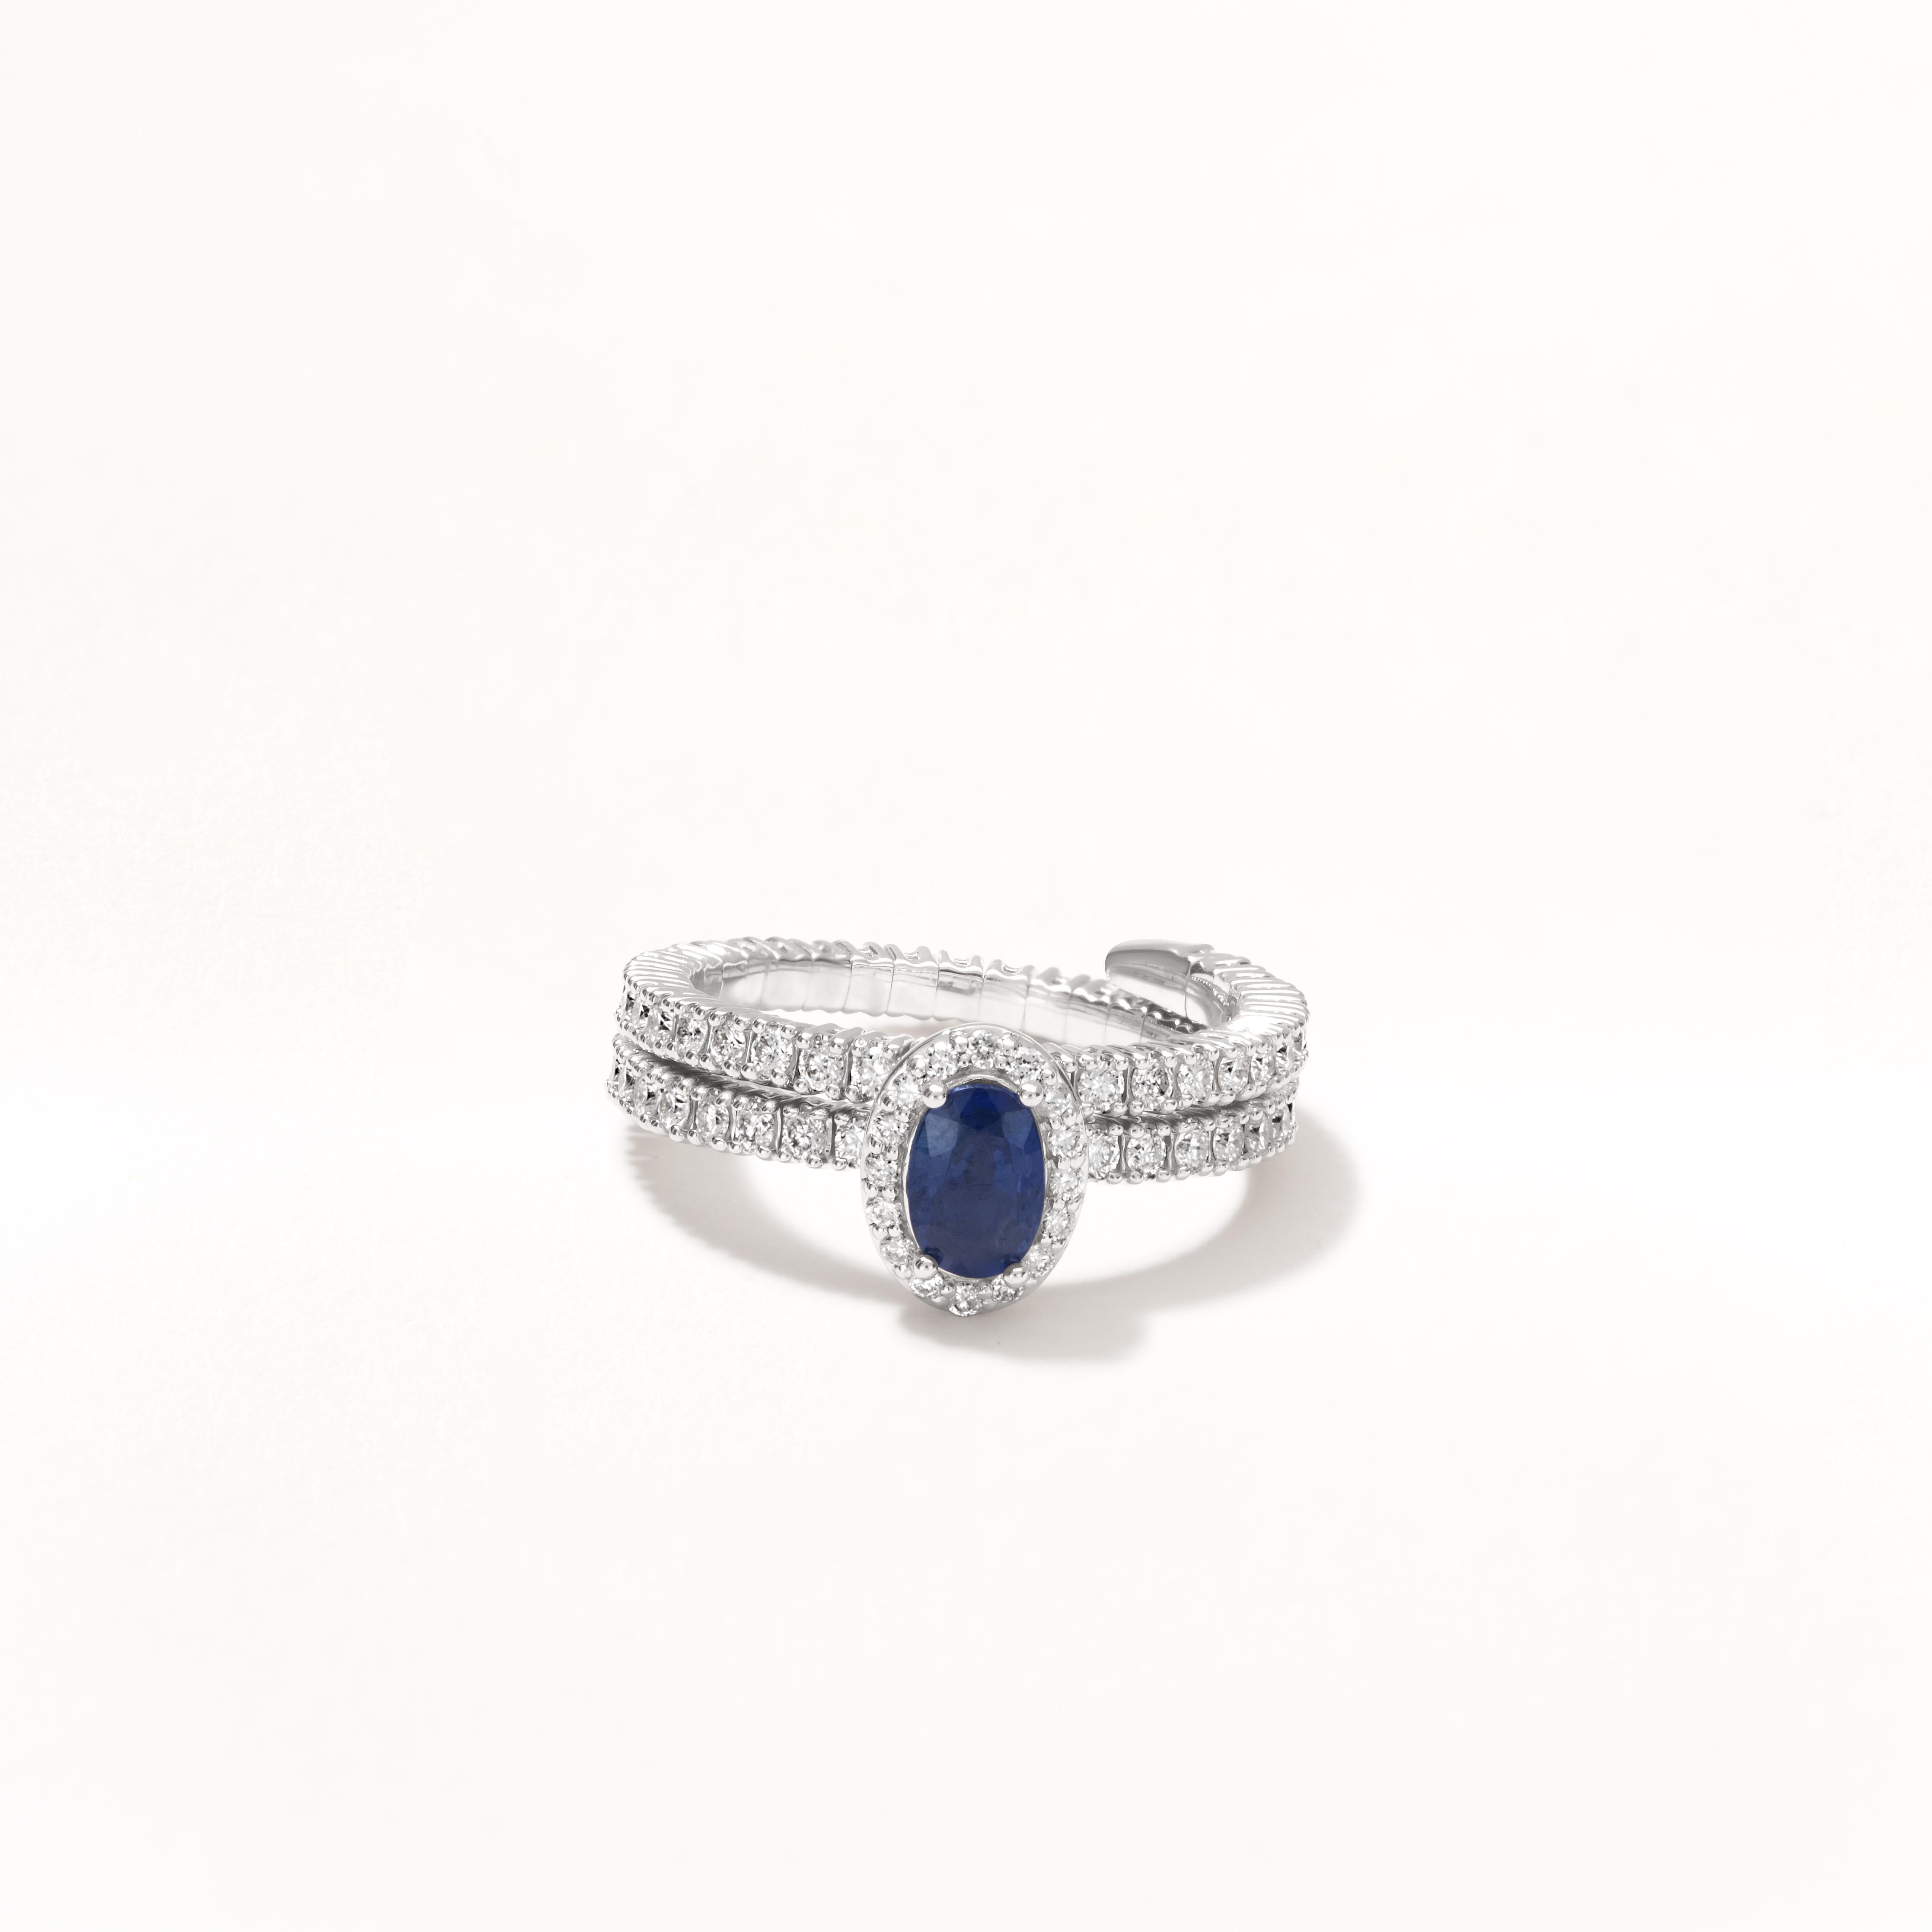 Adjustable and flexible, this ring can be worn on any finger you like. This 18k white gold adjustable band features an .59 ct. oval cut blue sapphire in a scintillating halo of round diamonds . The multi row shanks are studded with diamond making it